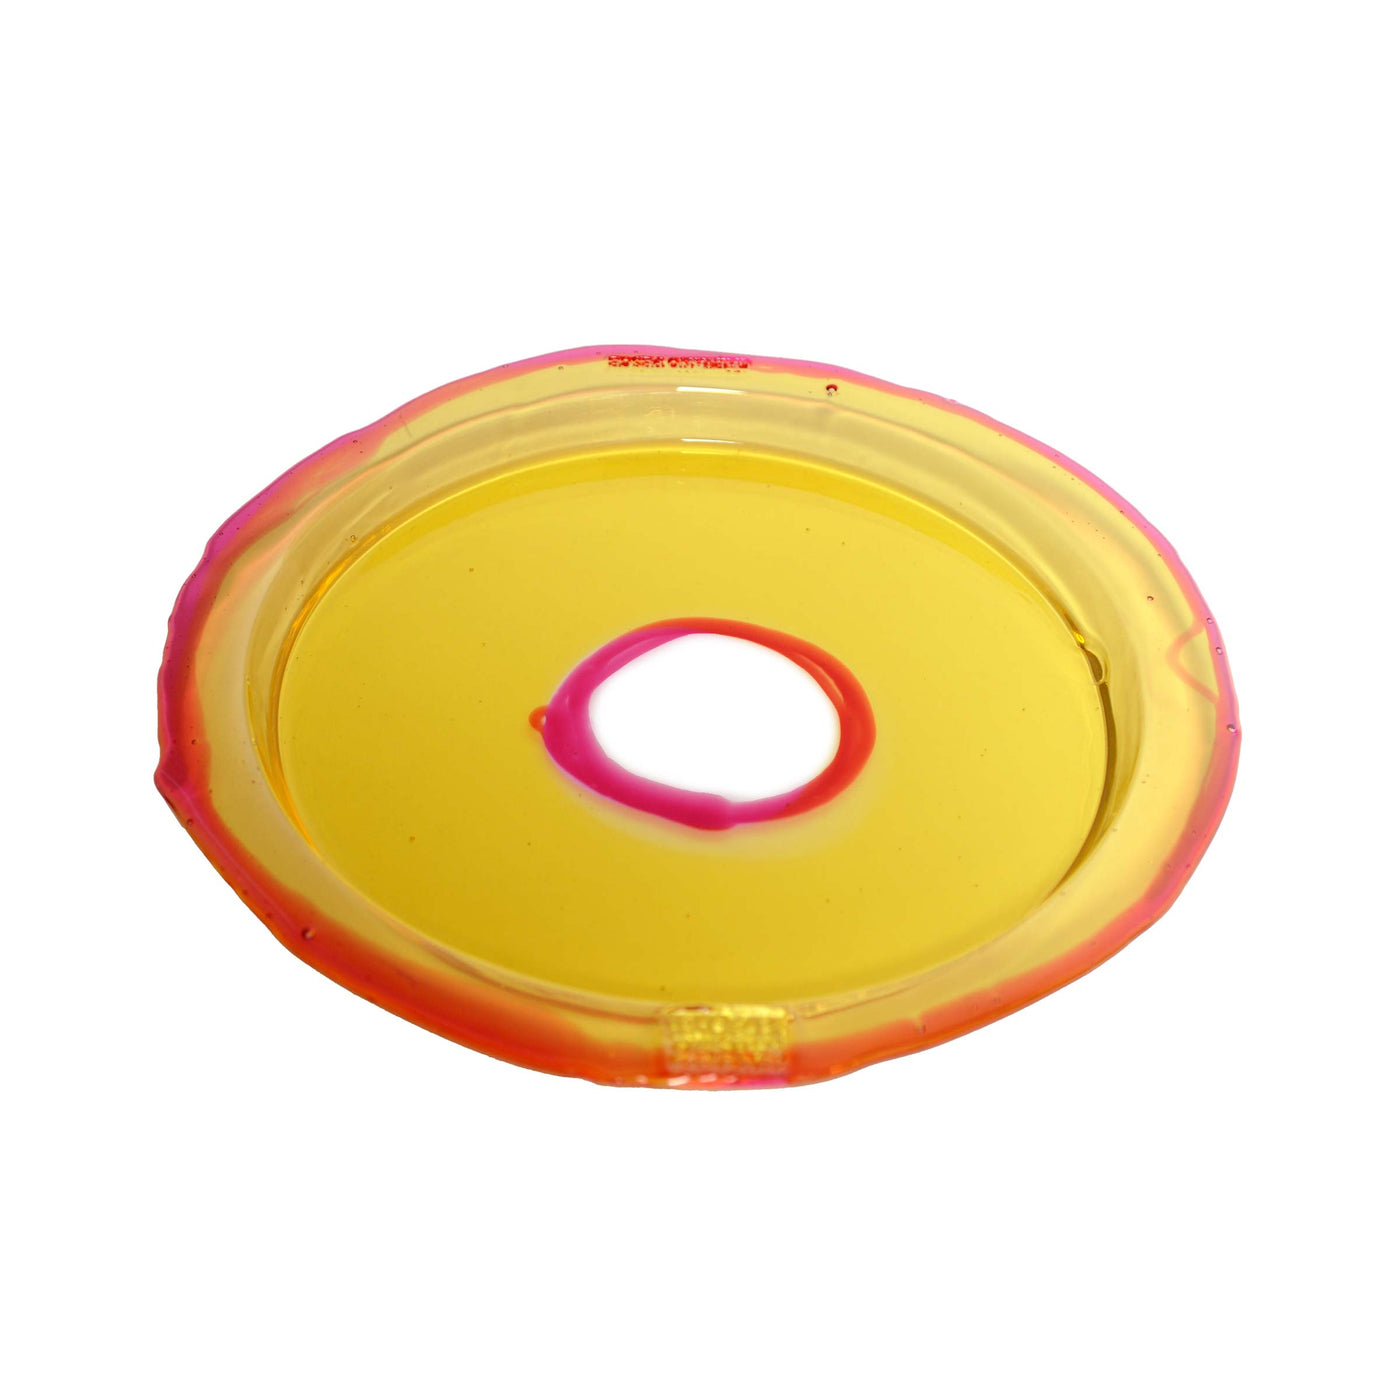 Resin Round Tray TRY-TRAY Yellow by Gaetano Pesce for Fish Design 02